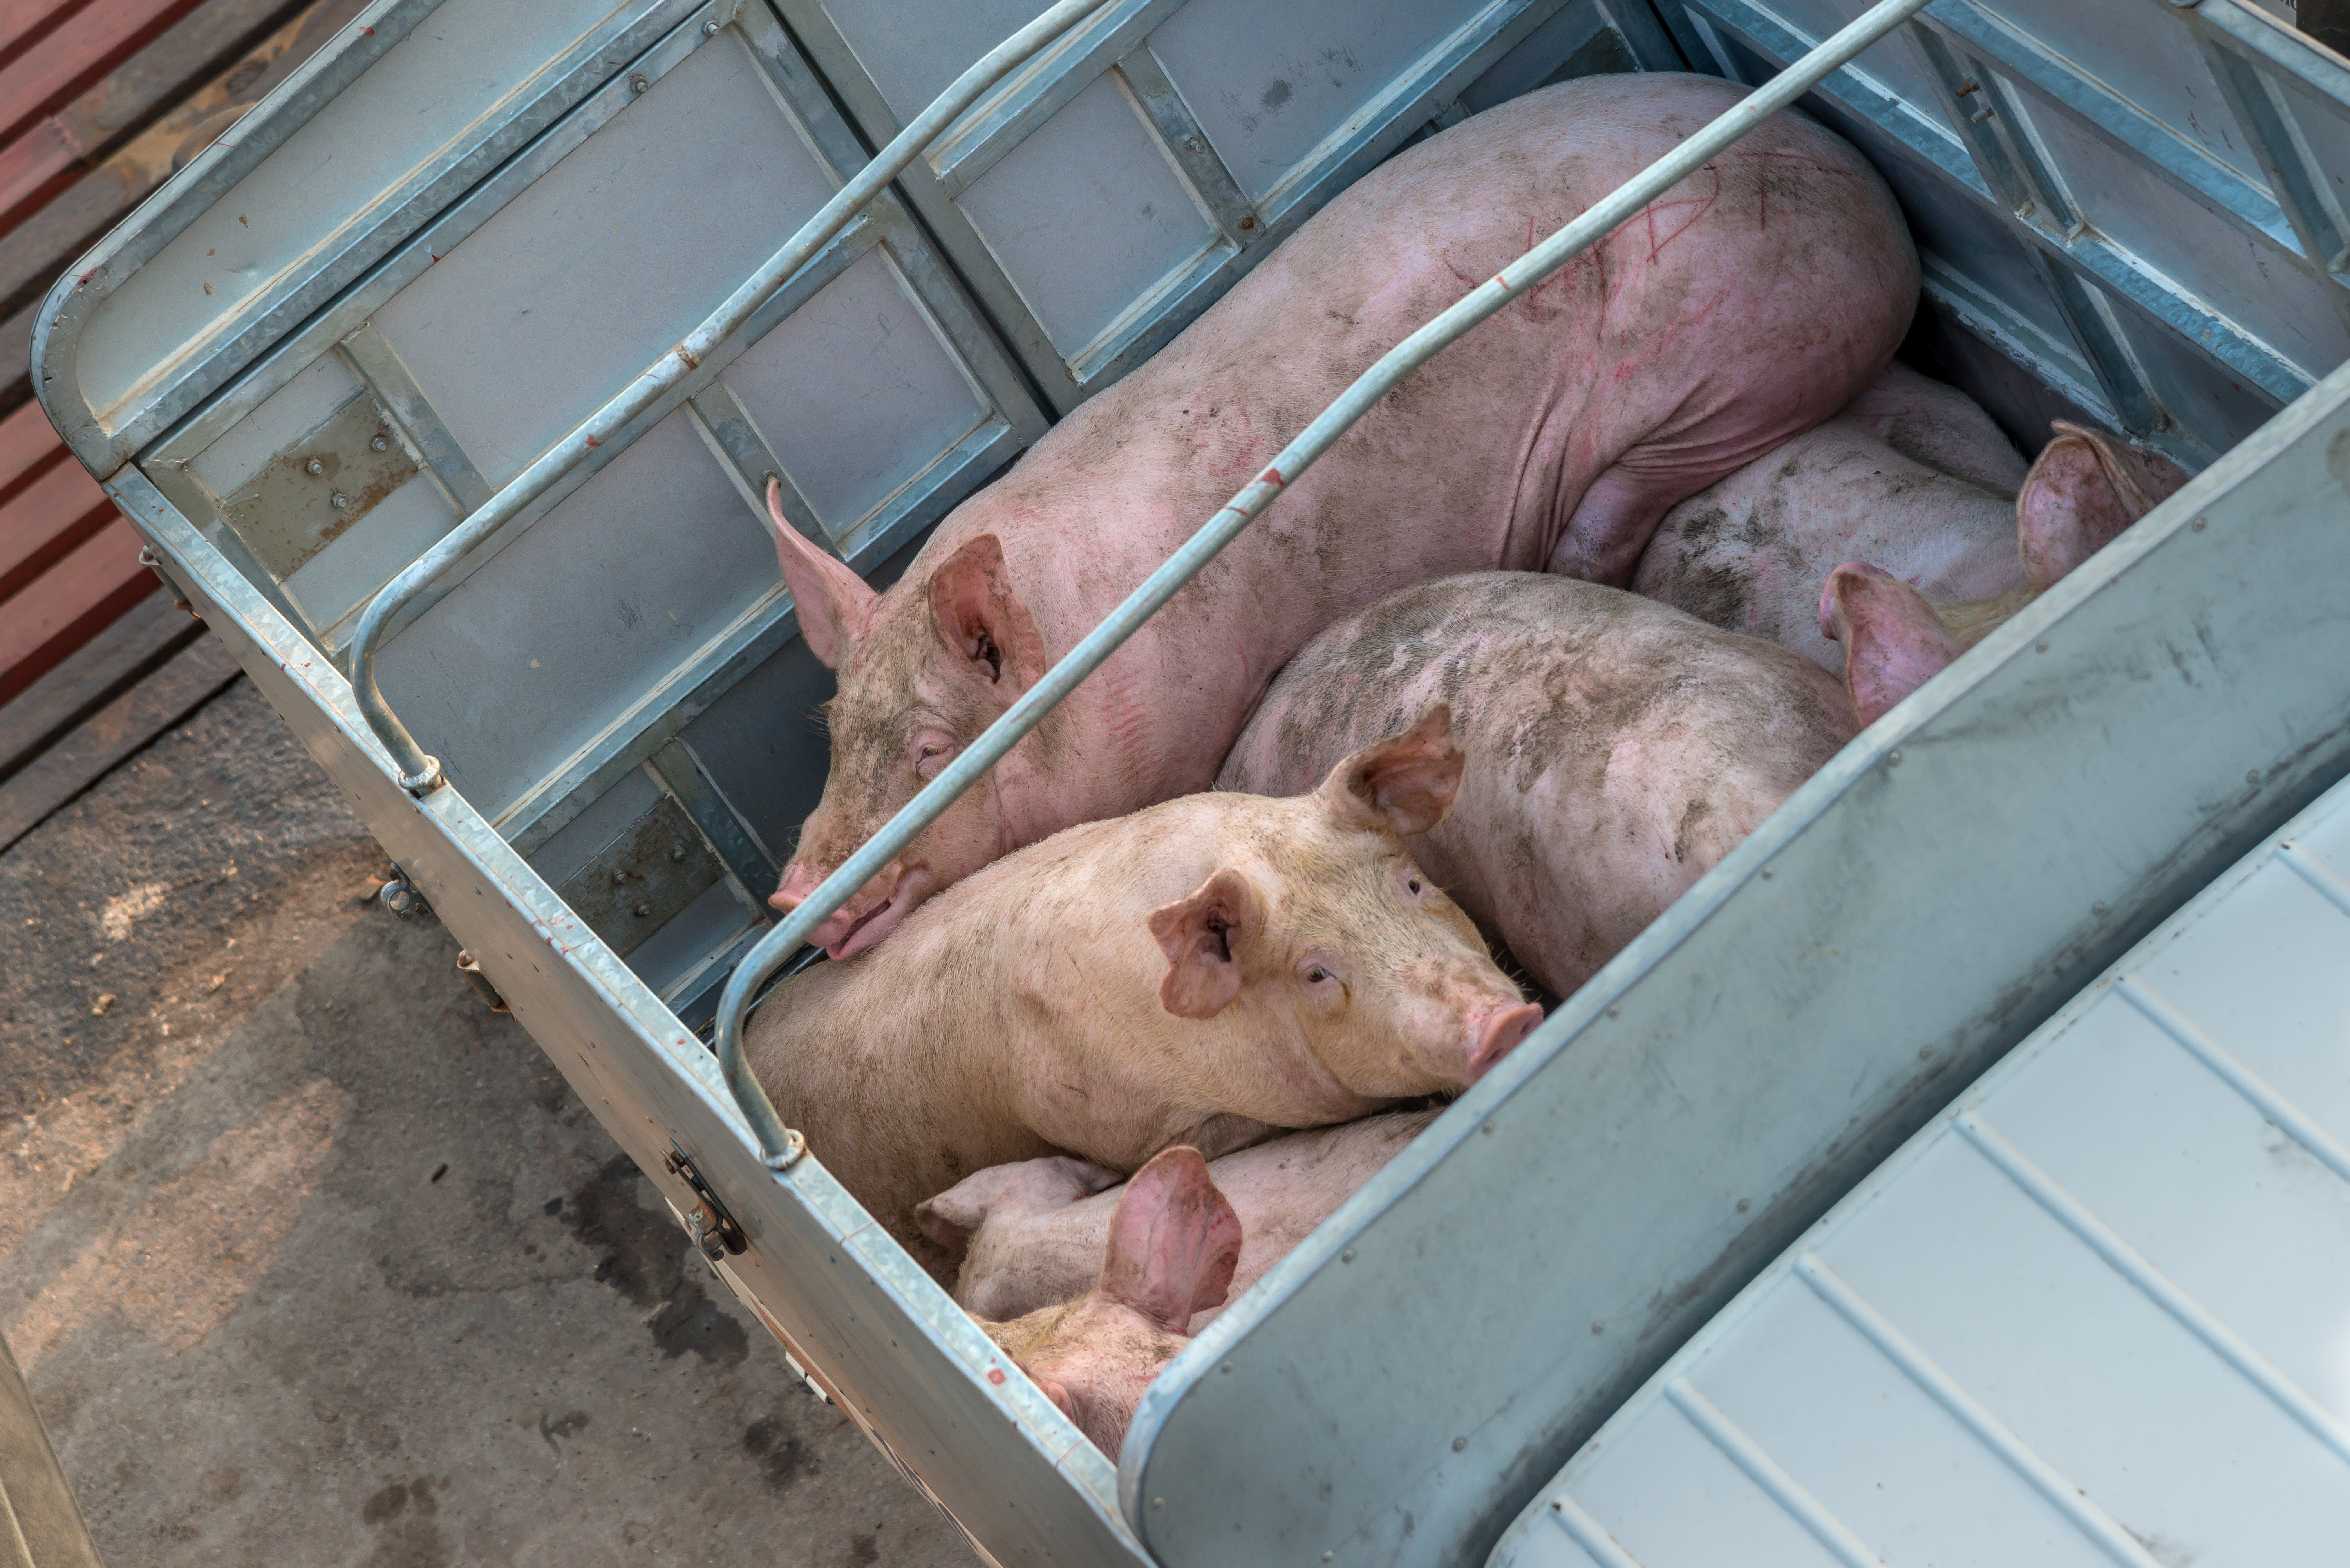 pigs in a truck awaiting slaughter